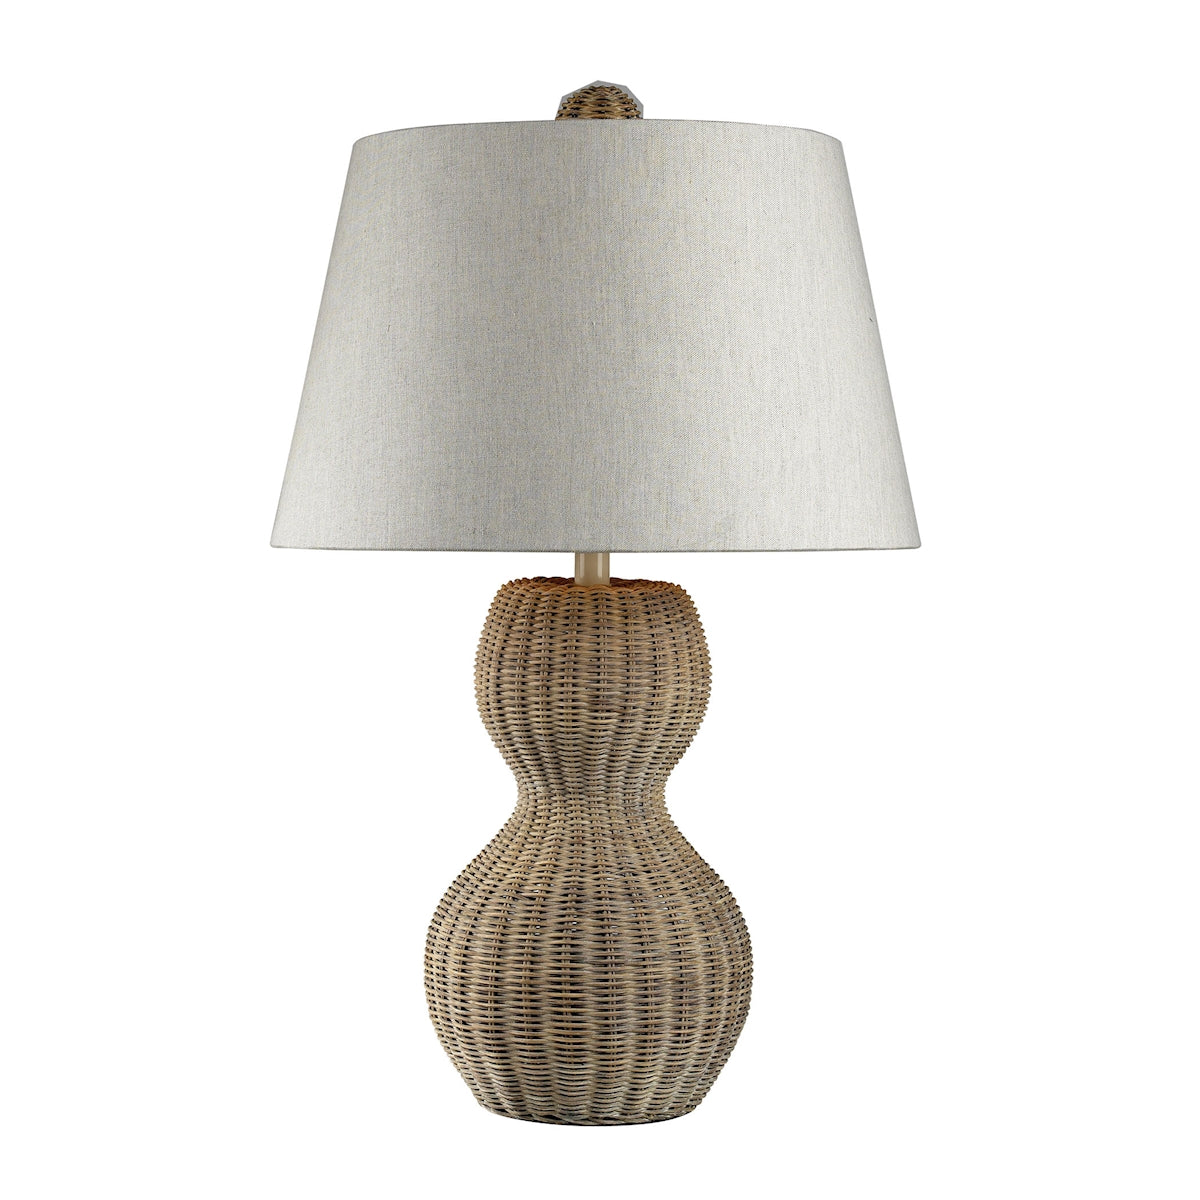 Dimond Lighting Sycamore Hill Rattan Table Lamp Table Lamps, Dimond Lighting, - Modish Store